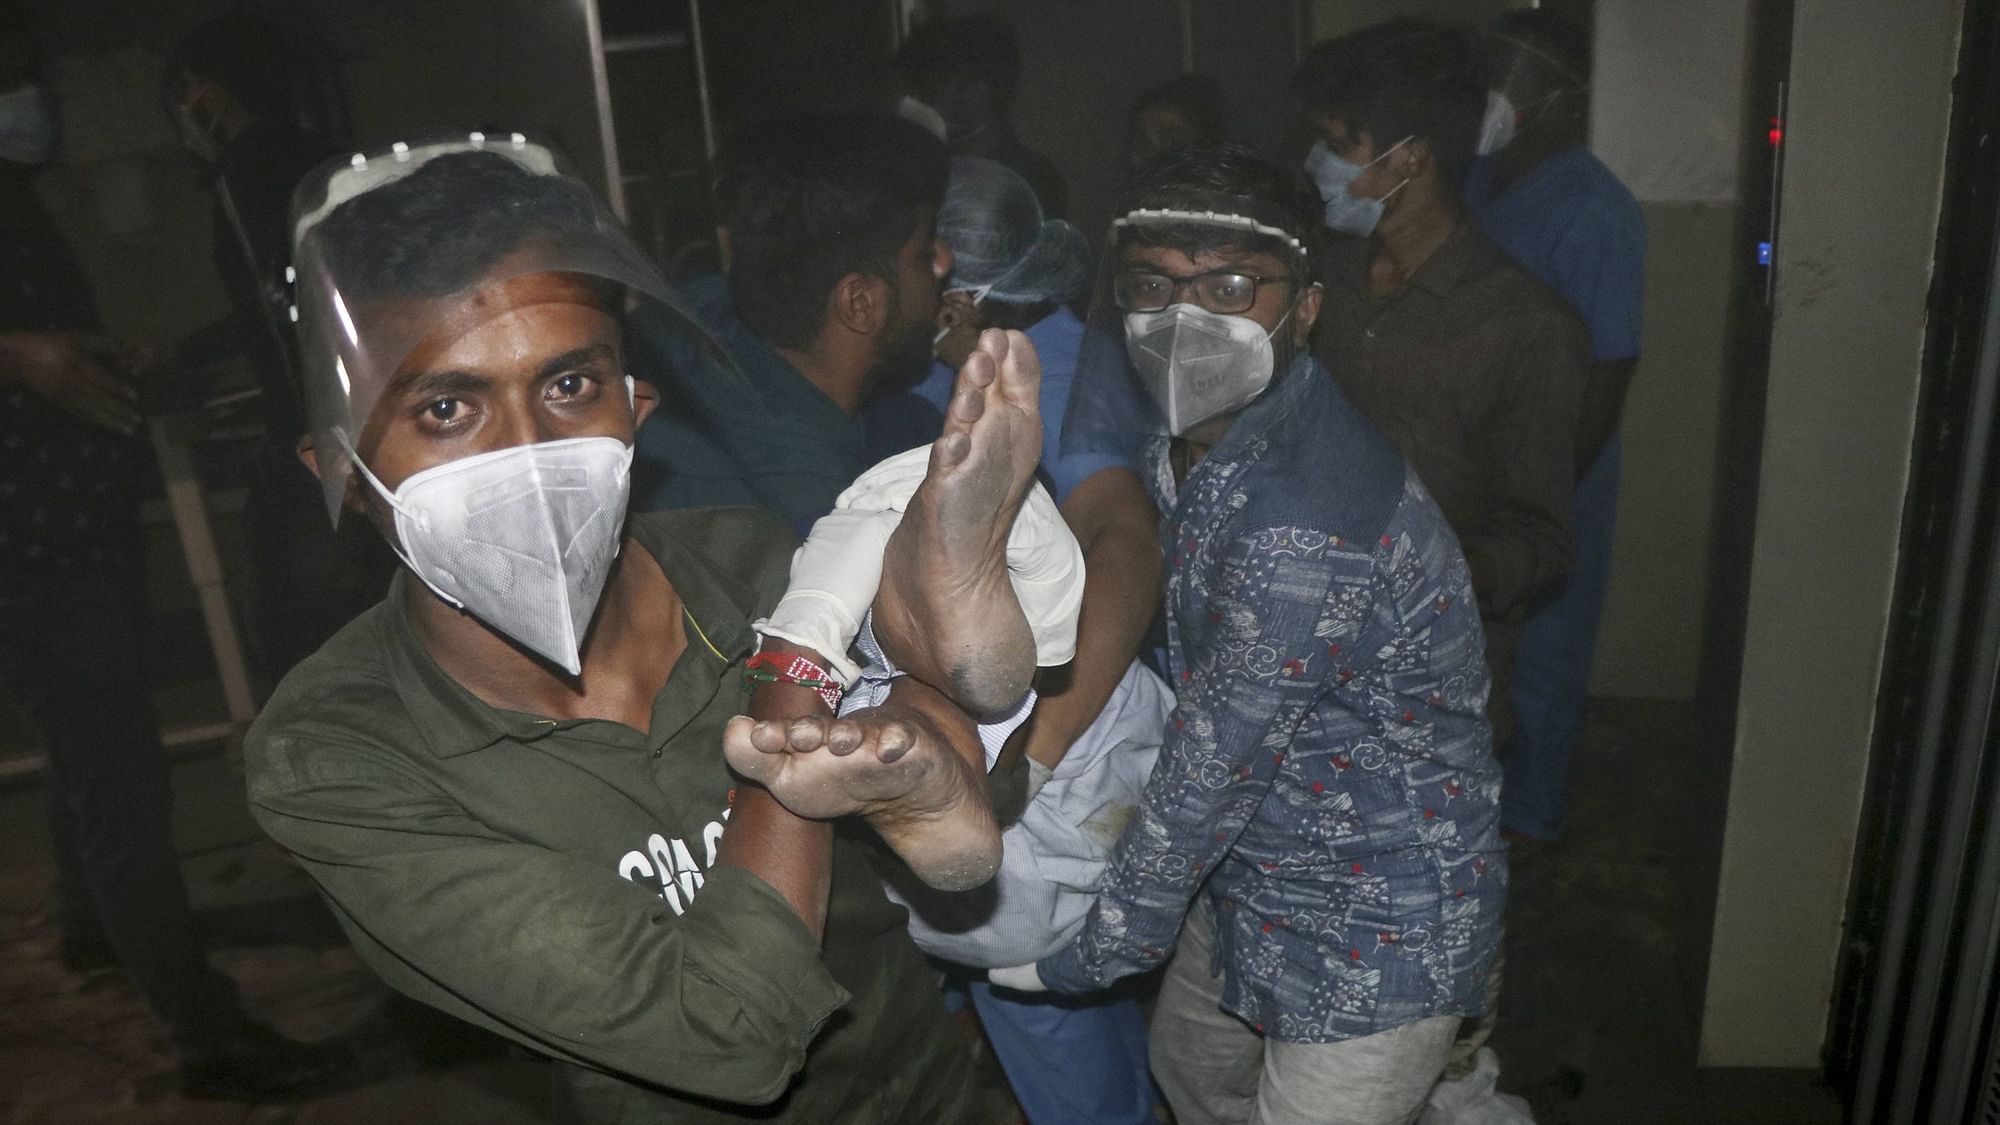  Rescue workers and hospital staff move COVID-19 patients to a safer place after the fire broke out in the ICU of a designated COVID-19 hospital, in Rajkot, Friday, Nov. 27, 2020. Five COVID-19 patients died in the incident.